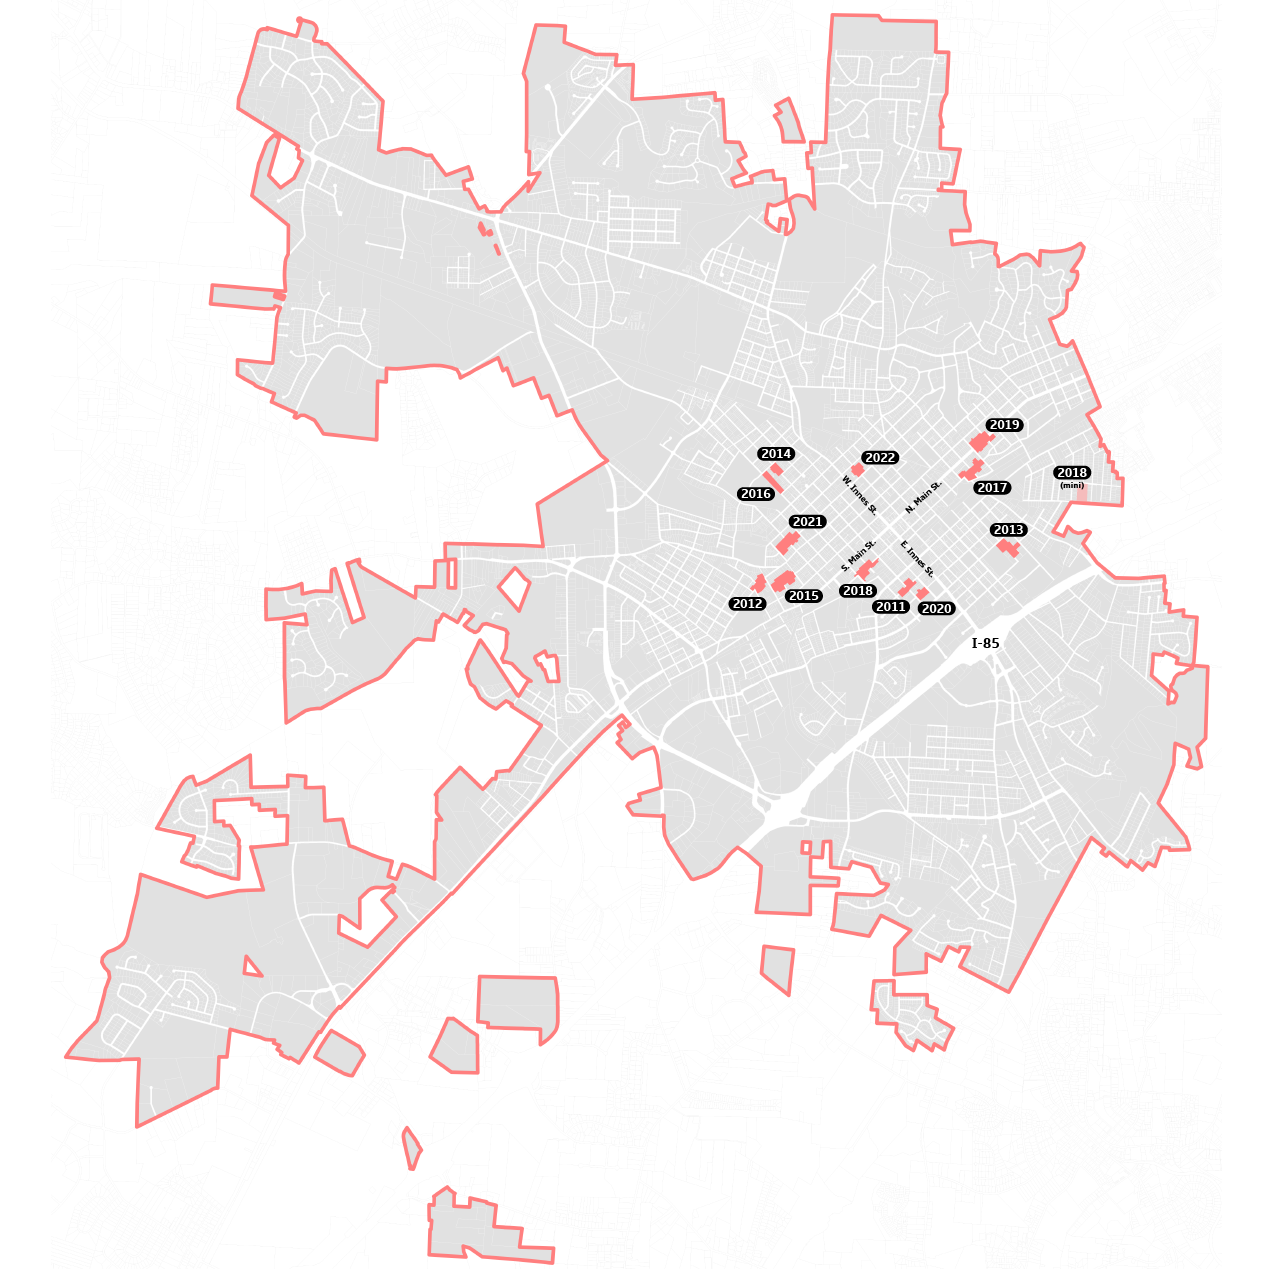 Map of previous BlockWork locations showing full city of Salisbury, NC limits.